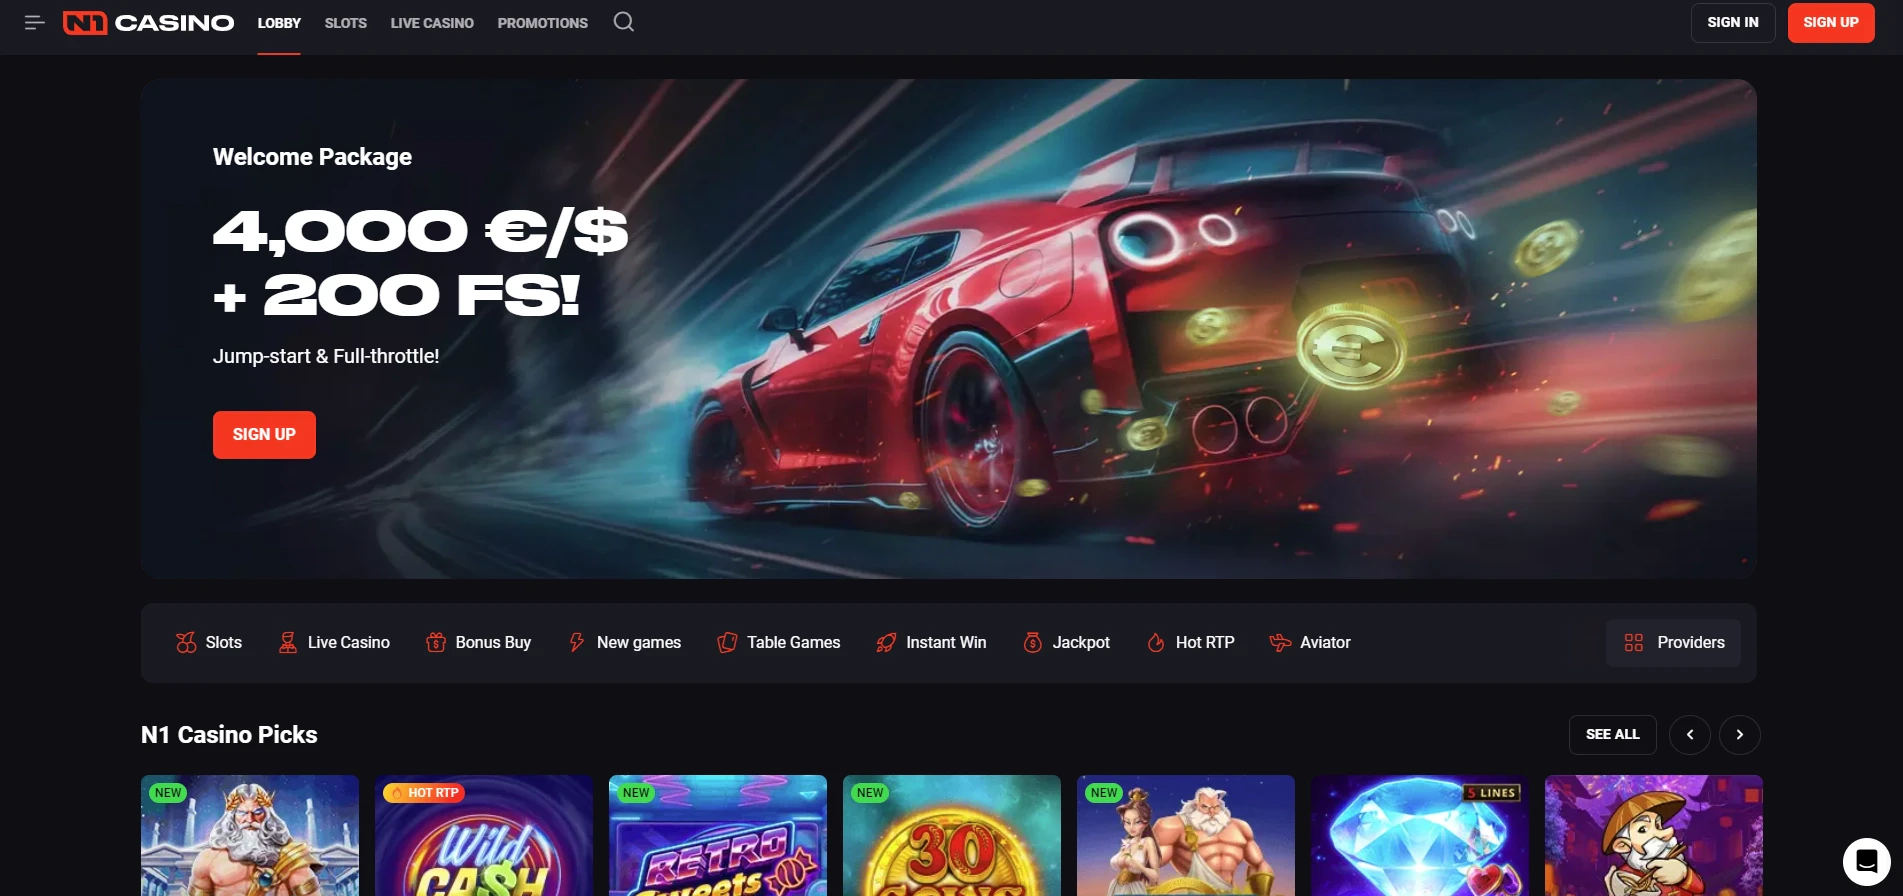 N1 Casino Home Page